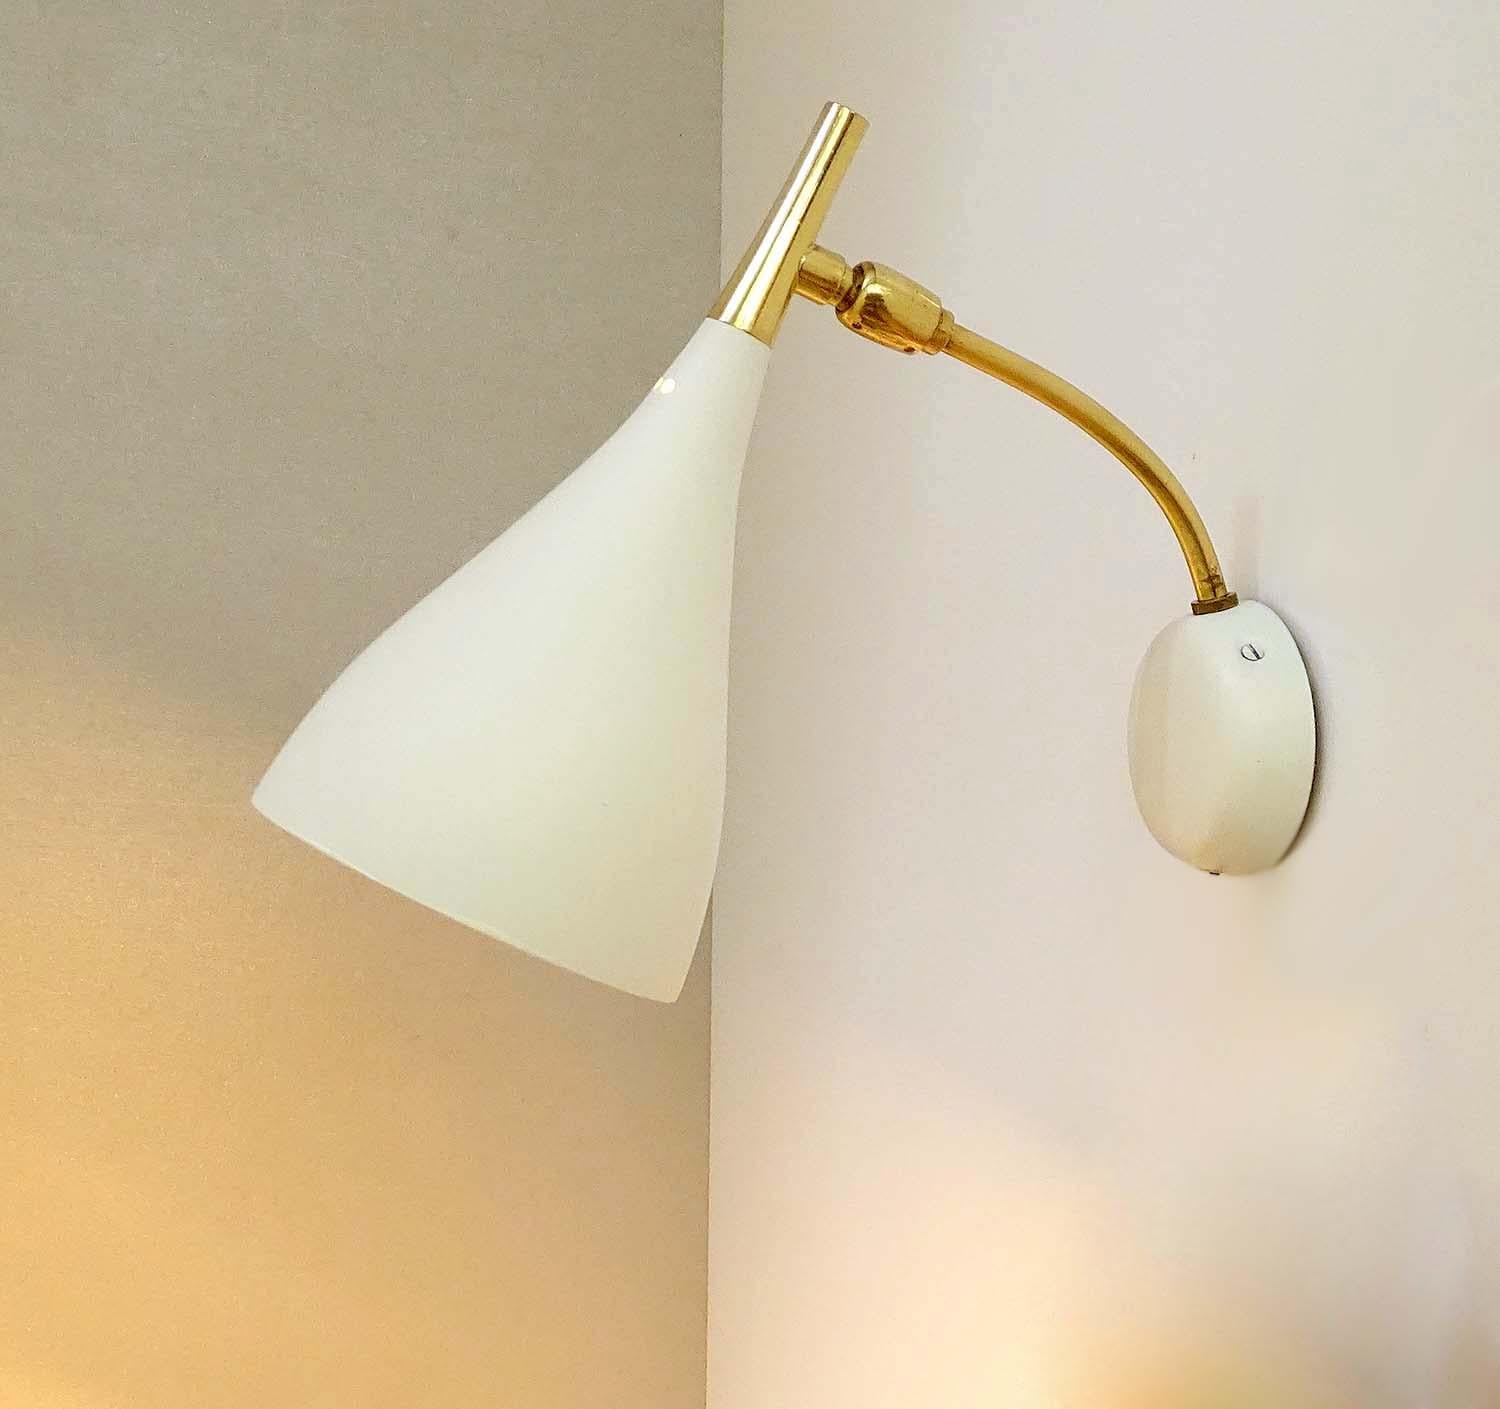 Pair of midcentury wall sconces,  diabolo shades on brass structure, the shades angle can be adjusted
Dimensions:
H 8.67 in. x W 4.34 in. x D 6.3 in.
H 22 cm x W 11 cm x D 16 cm
One candelabra bulbs up to 40 watts each.